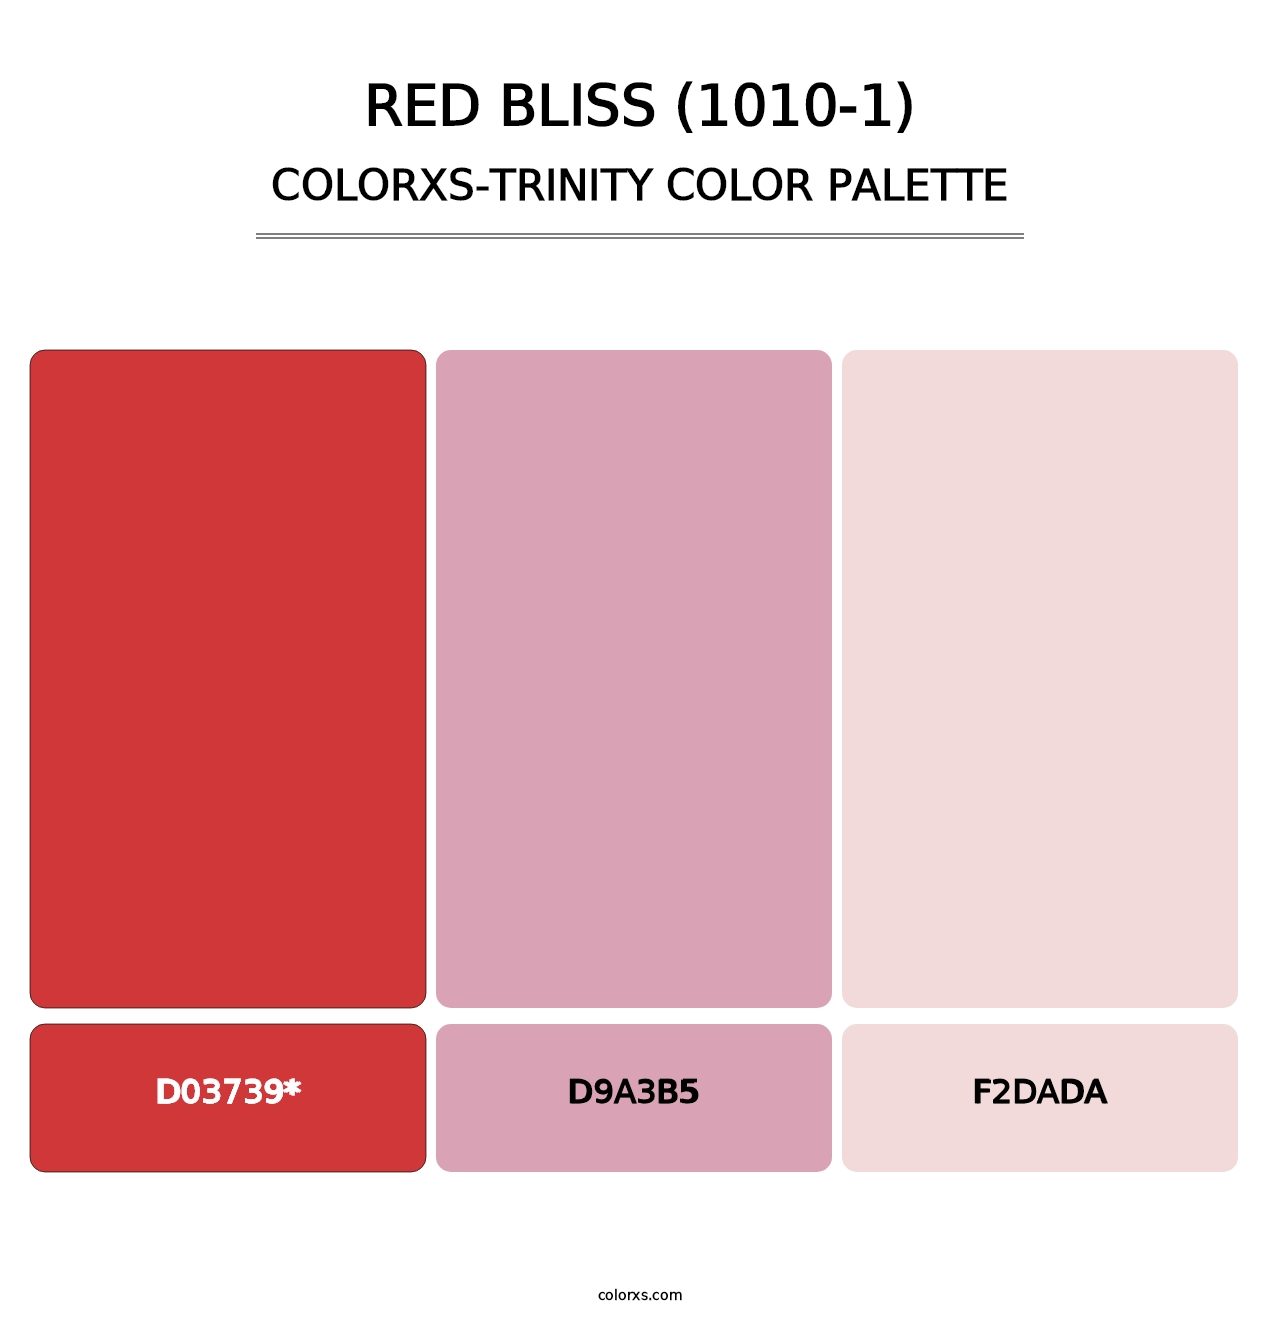 Red Bliss (1010-1) - Colorxs Trinity Palette